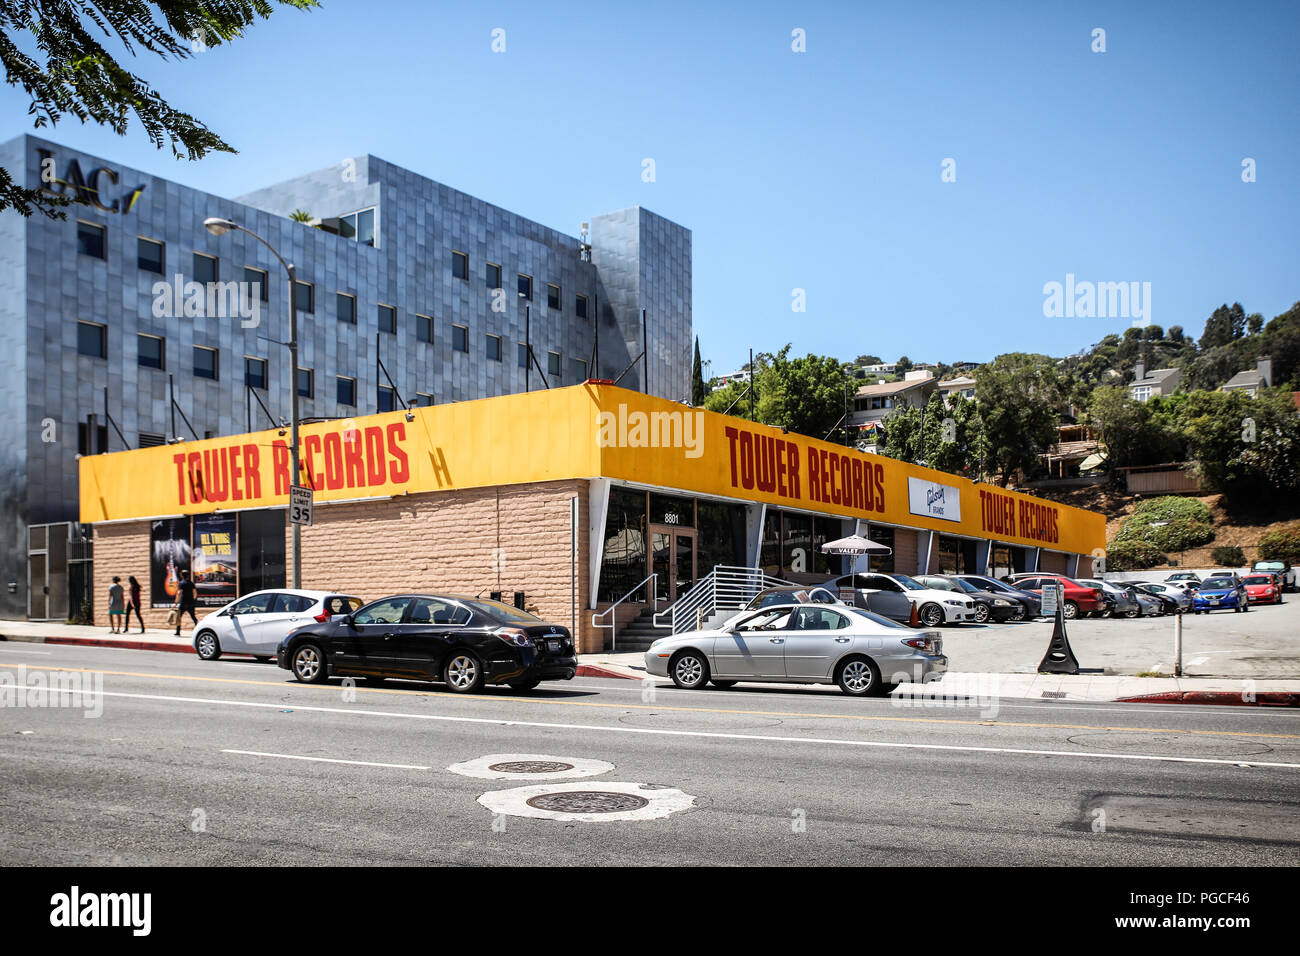 Los Angeles, United States of America - July 26, 2017: Tower Records store in West Hollywood. Stock Photo